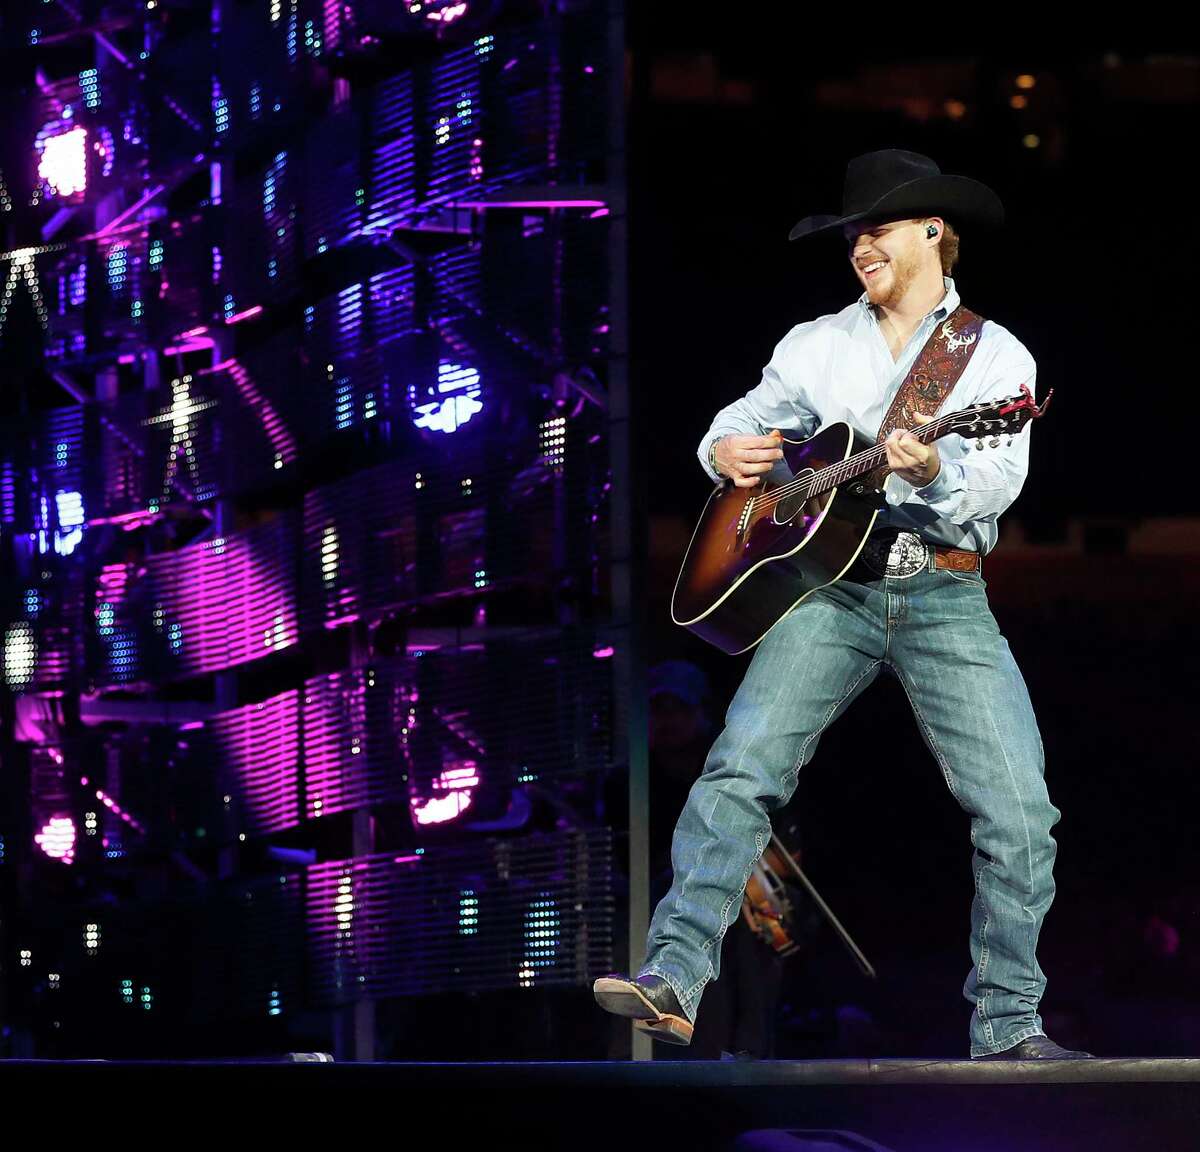 Cody Johnson performs at the Houston Livestock Show and Rodeo, at NRG Park, Wednesday, March 8, 2017, in Houston. ( Karen Warren / Houston Chronicle )